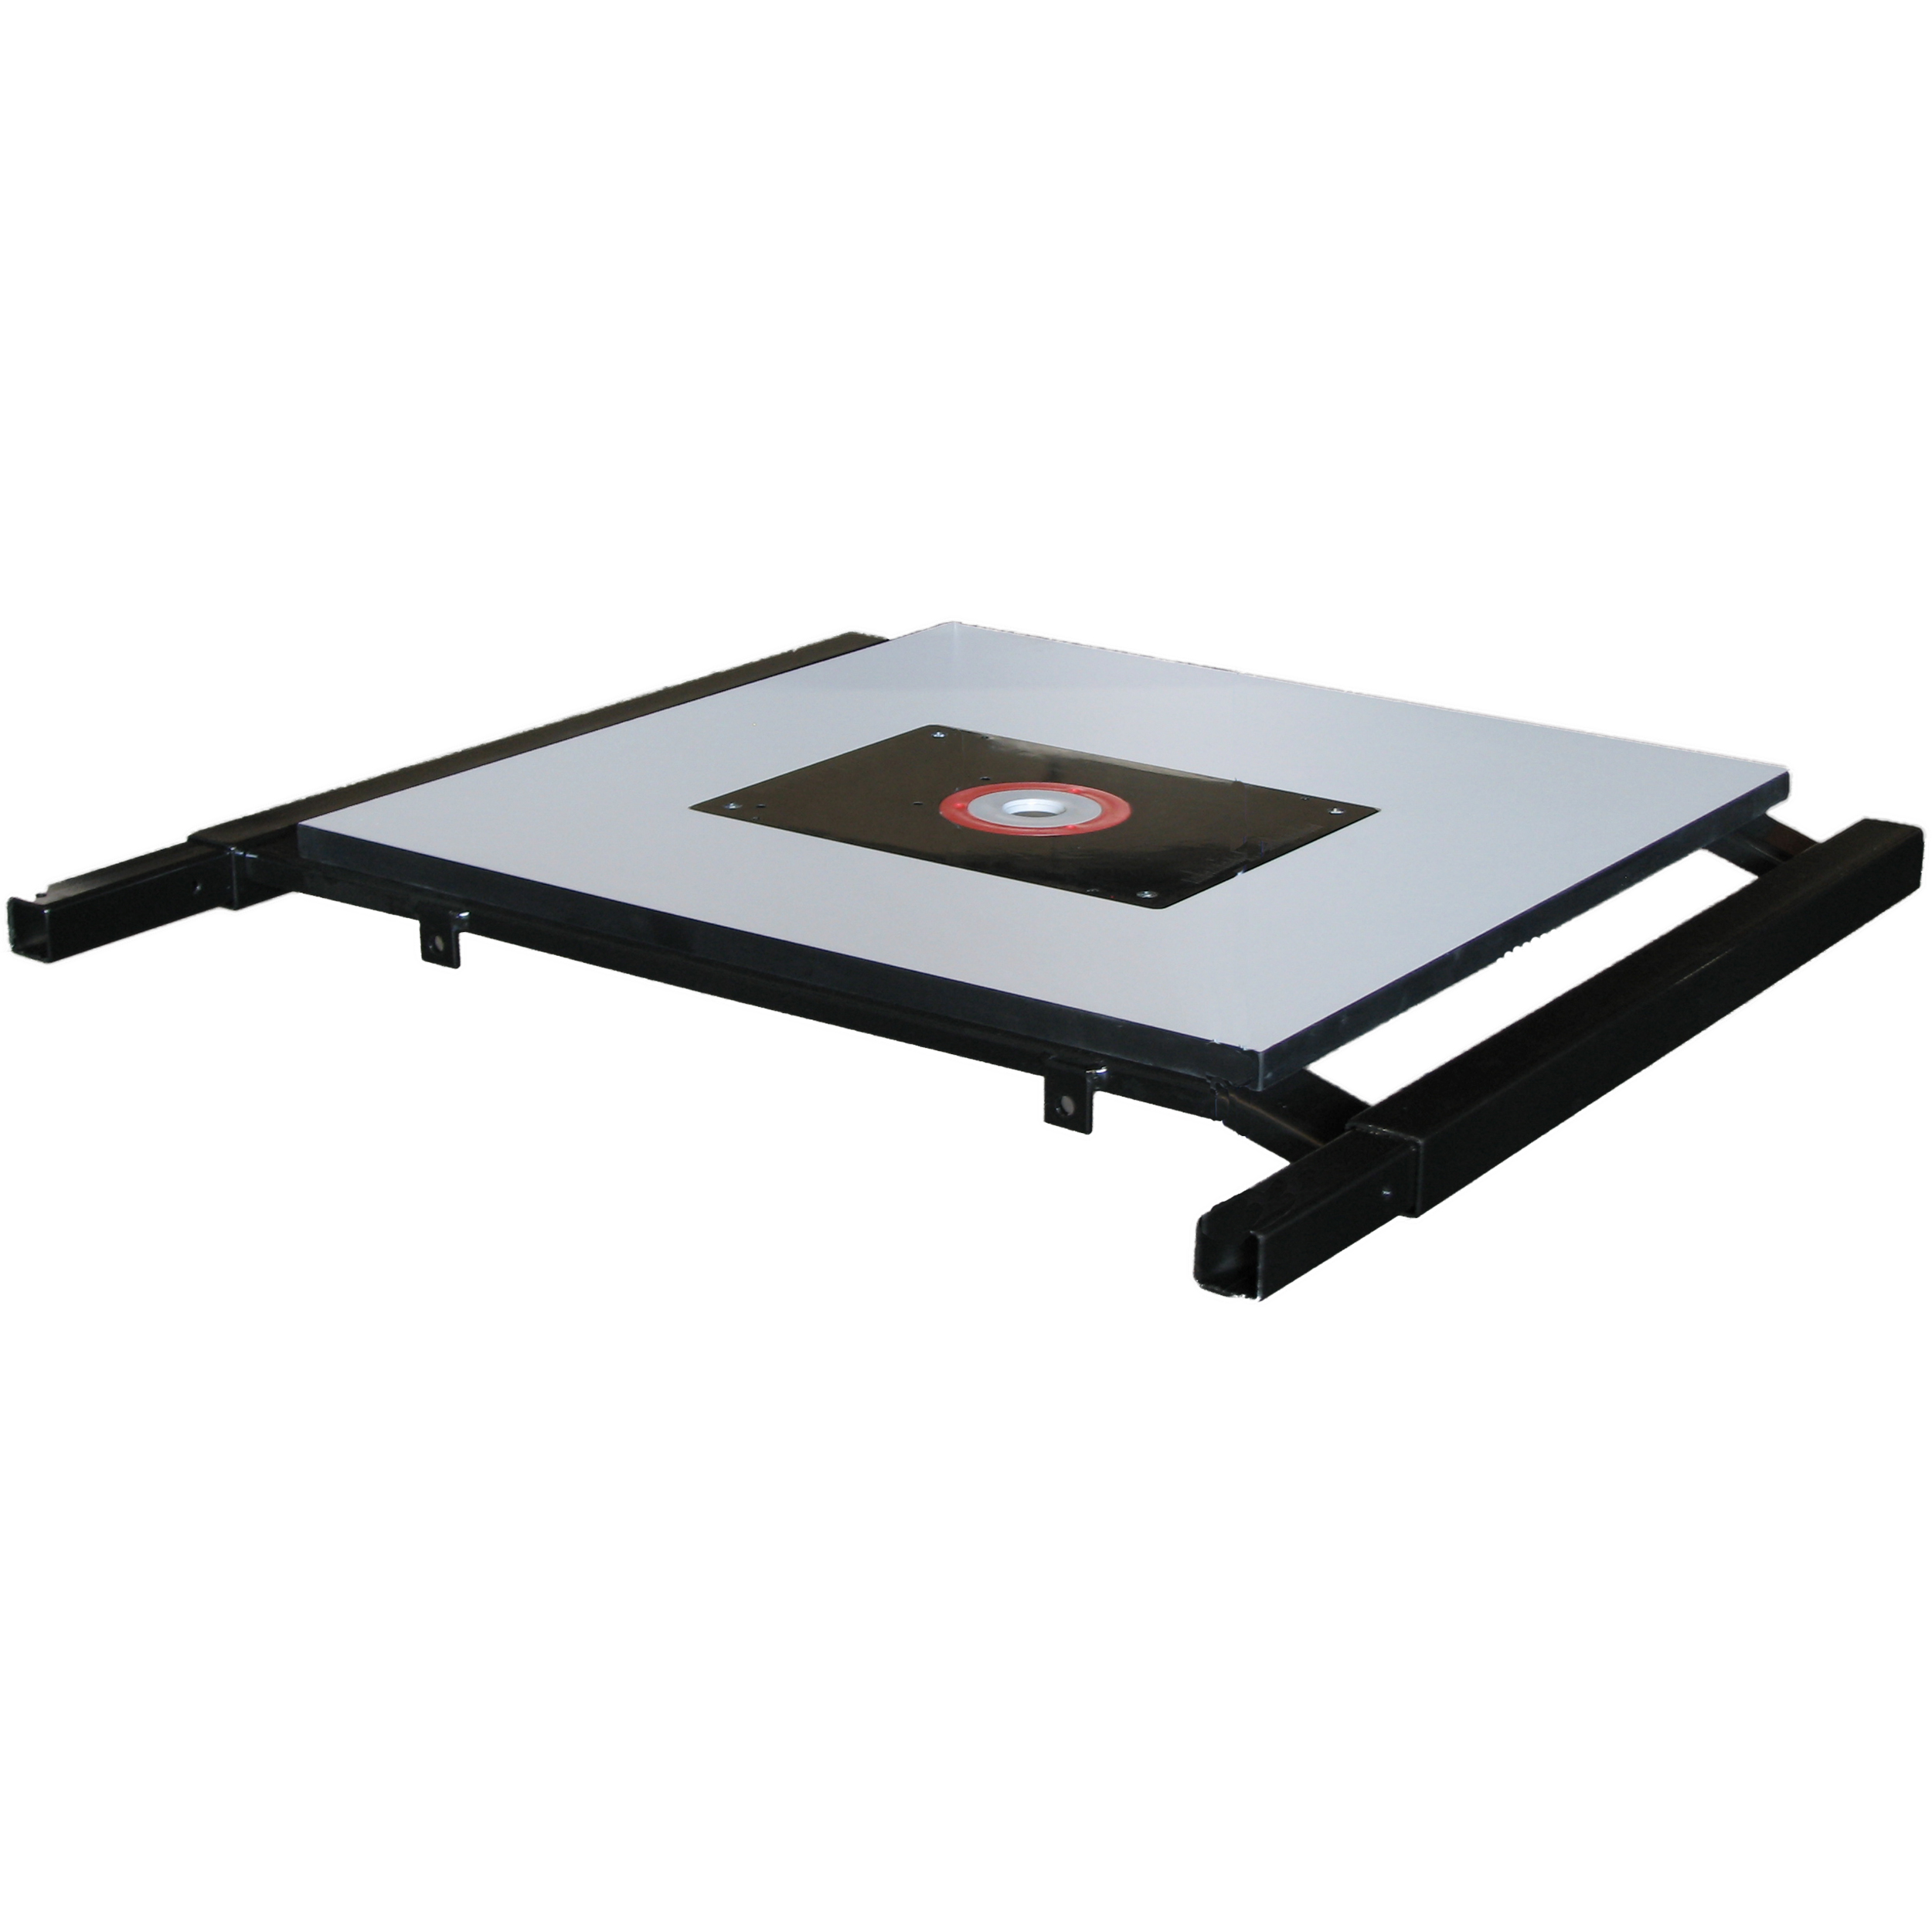 2780-rxt Router Extension Table